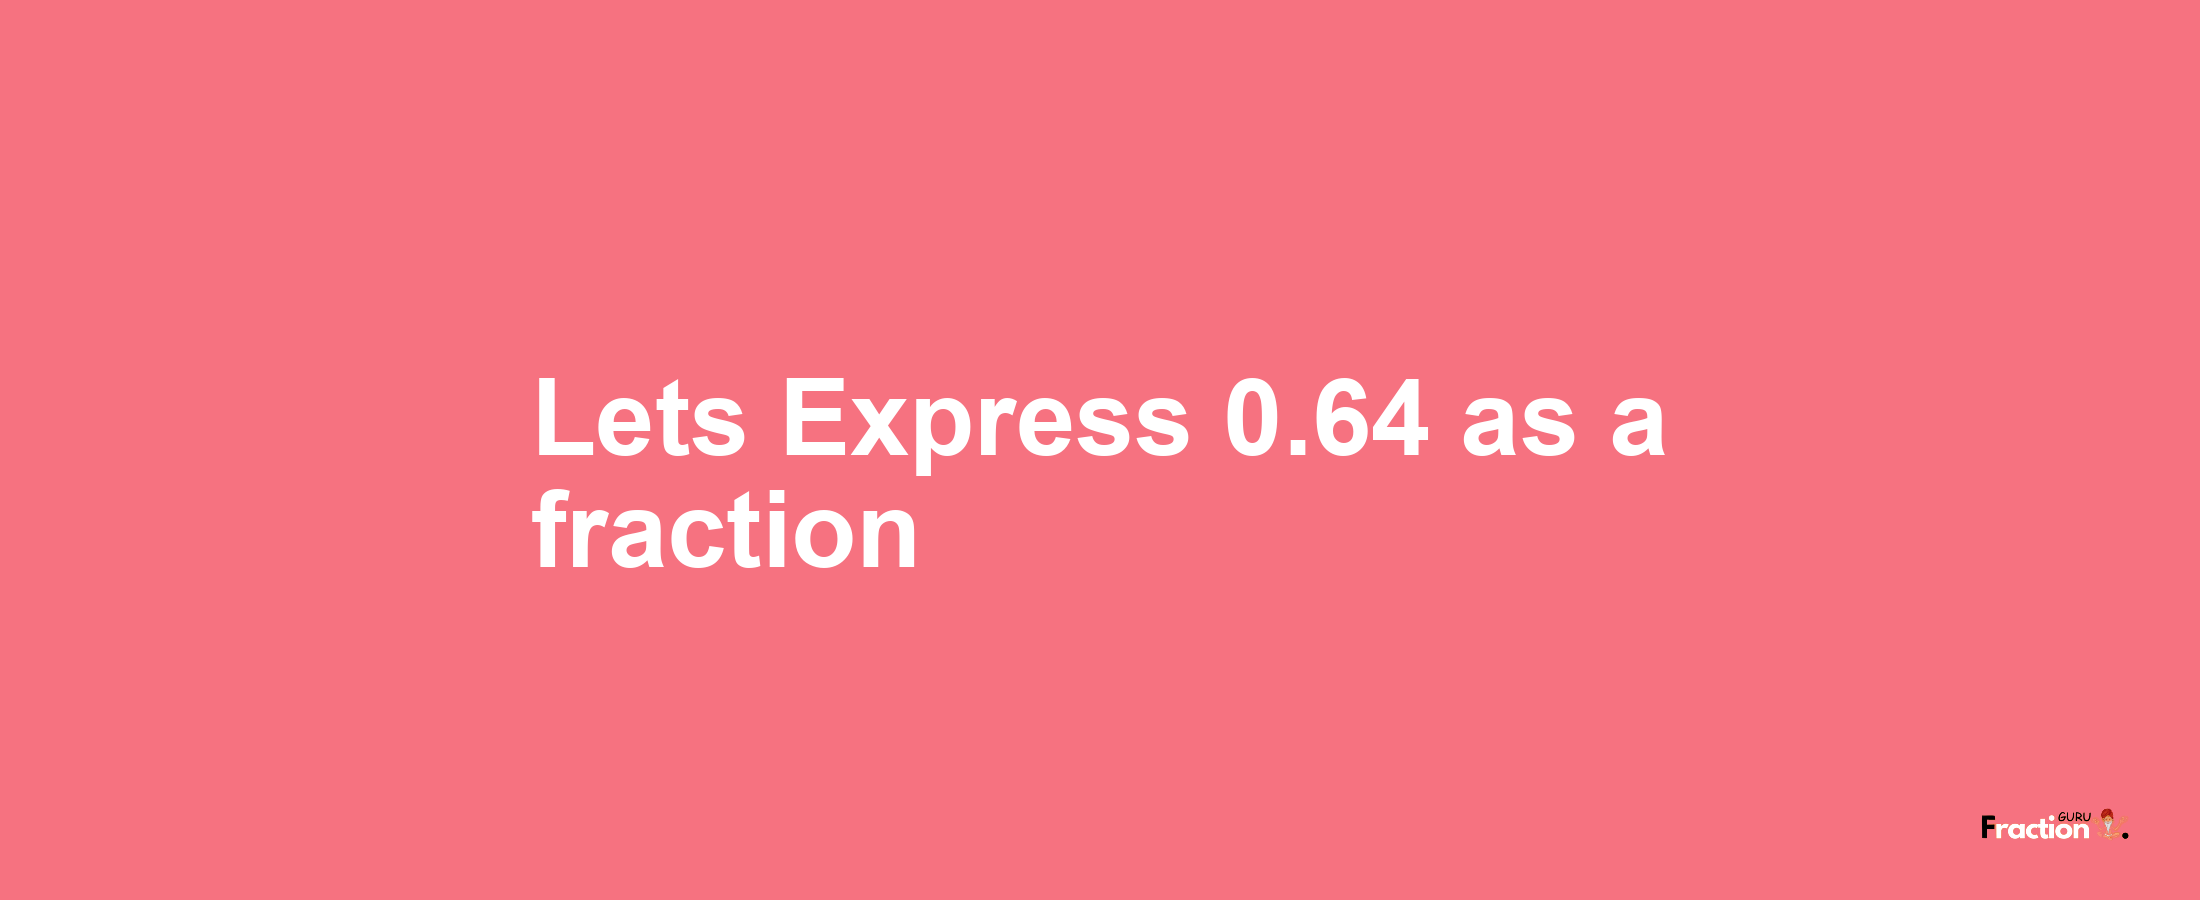 Lets Express 0.64 as afraction